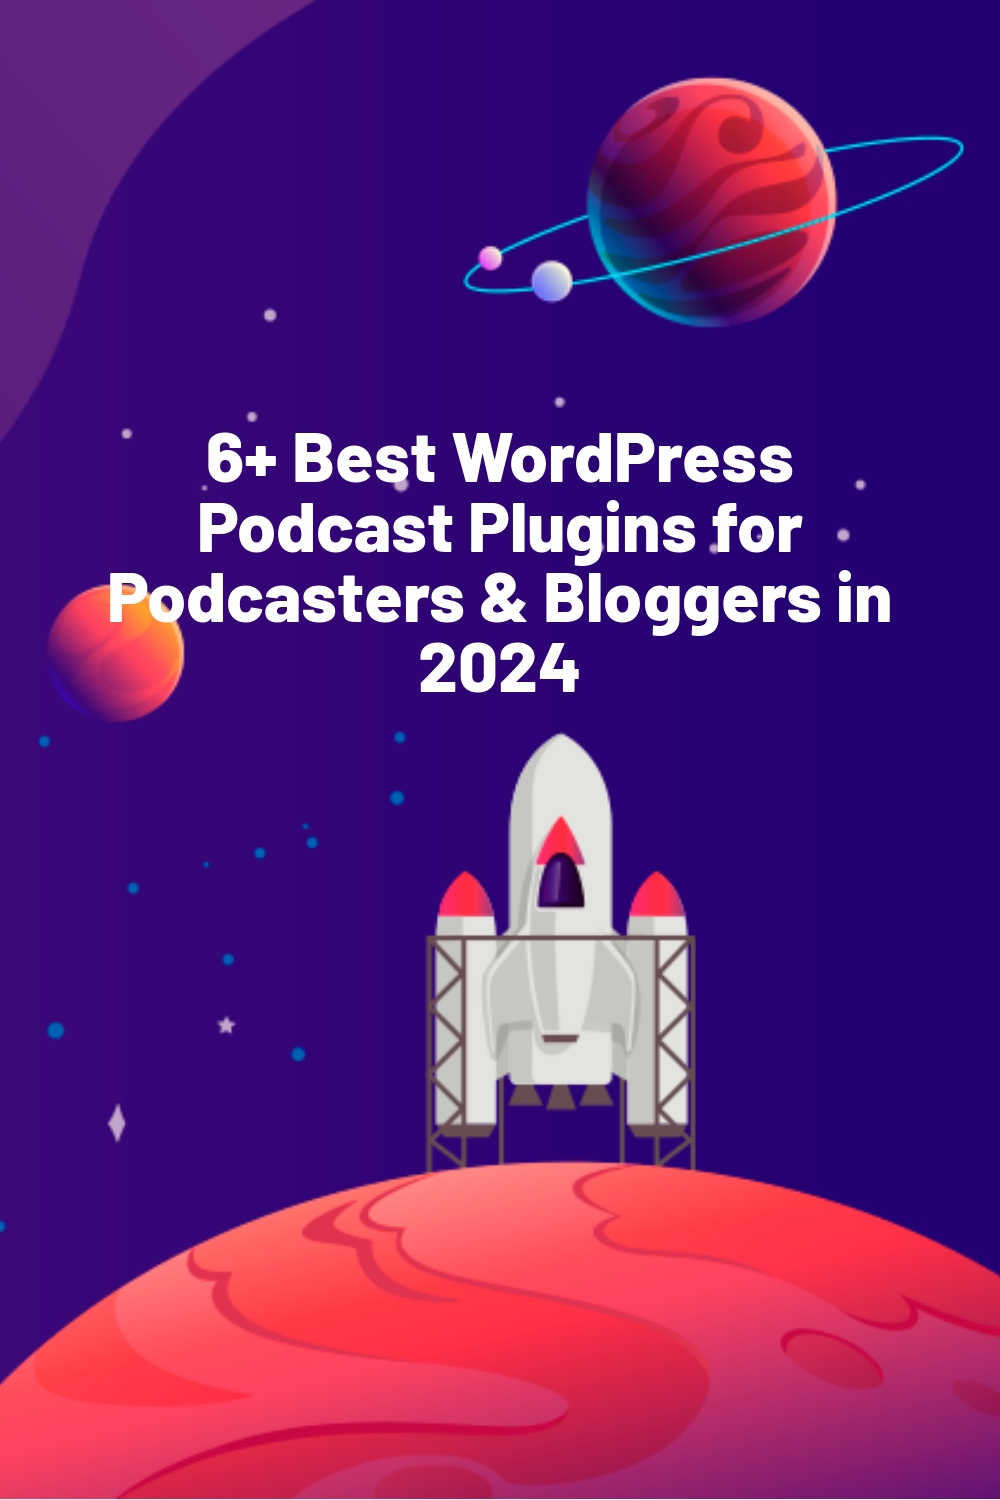 6+ Best WordPress Podcast Plugins for Podcasters & Bloggers in 2024